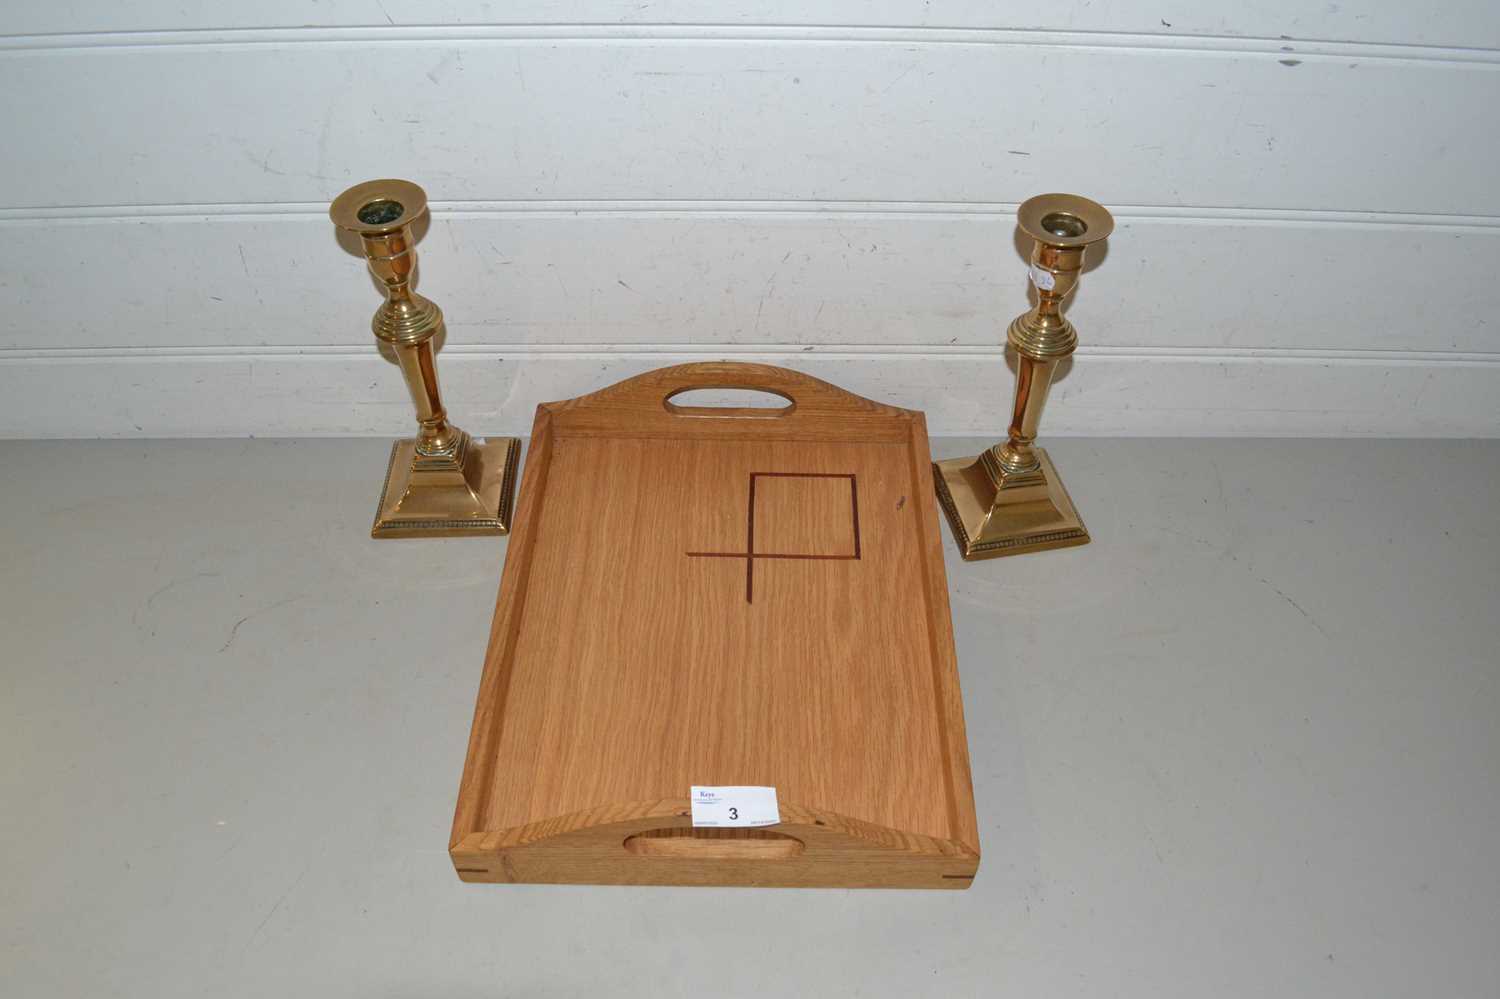 Pair of brass candlesticks and a serving tray